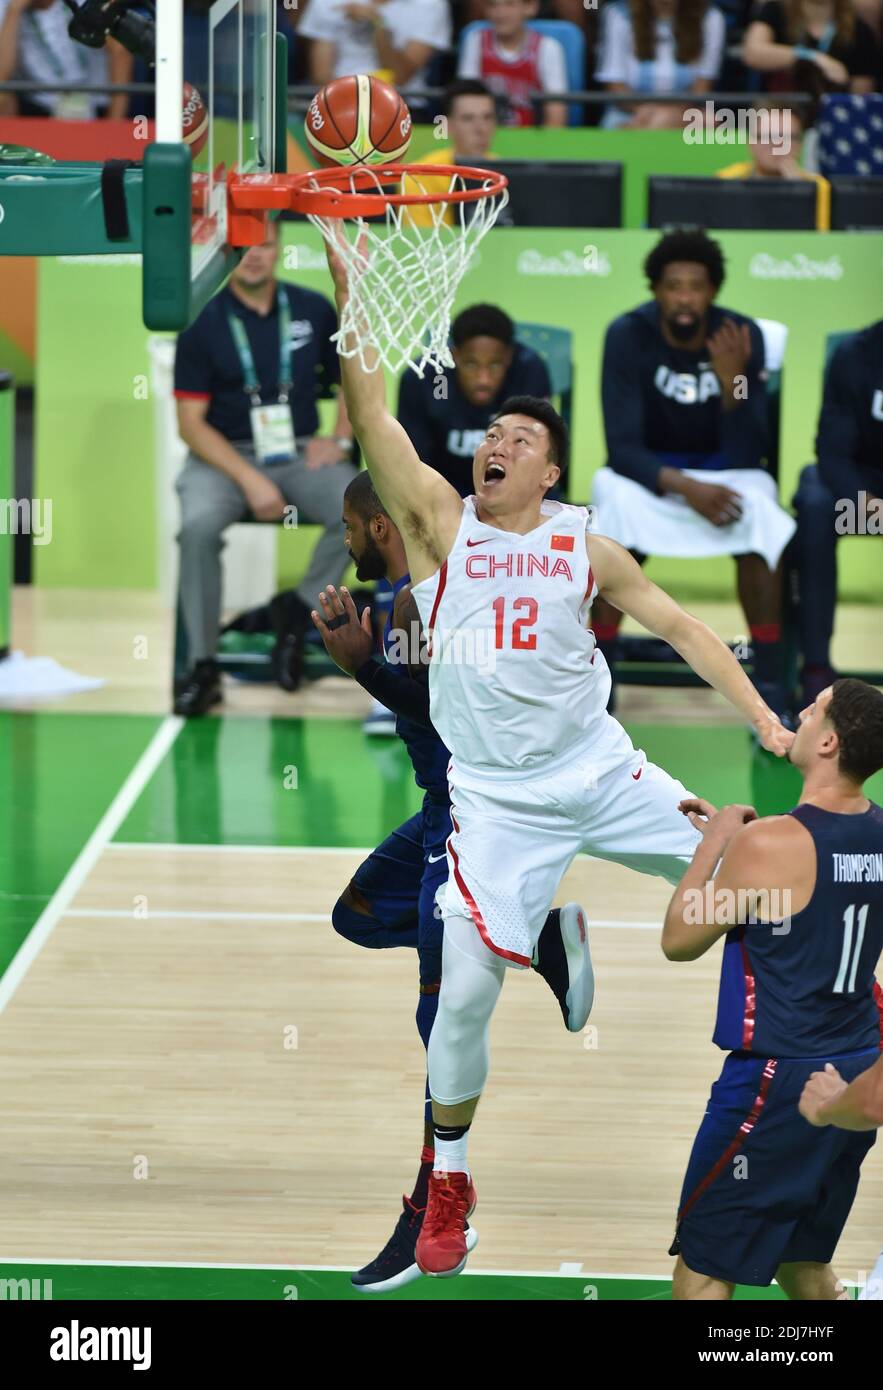 Gen Li in action during the China vs USA basketball game at the 2016 Rio Olympic Games on August 6, 2016 in Rio De Janeiro, Brazil. Photo by Lionel Hahn/ABACAPRESS.COM Stock Photo